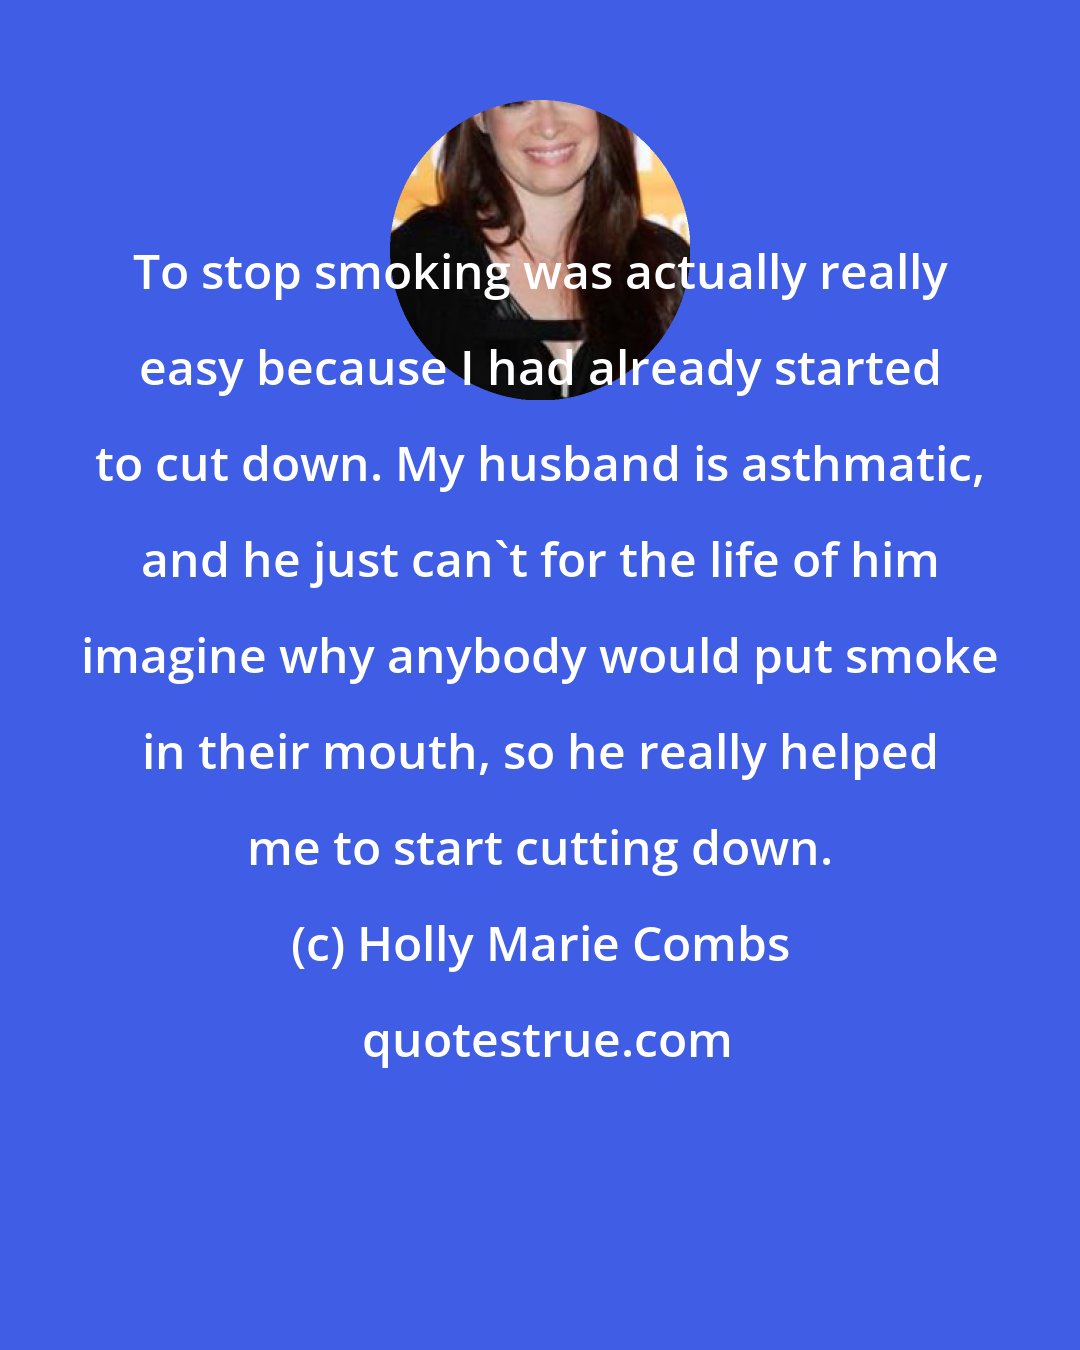 Holly Marie Combs: To stop smoking was actually really easy because I had already started to cut down. My husband is asthmatic, and he just can't for the life of him imagine why anybody would put smoke in their mouth, so he really helped me to start cutting down.